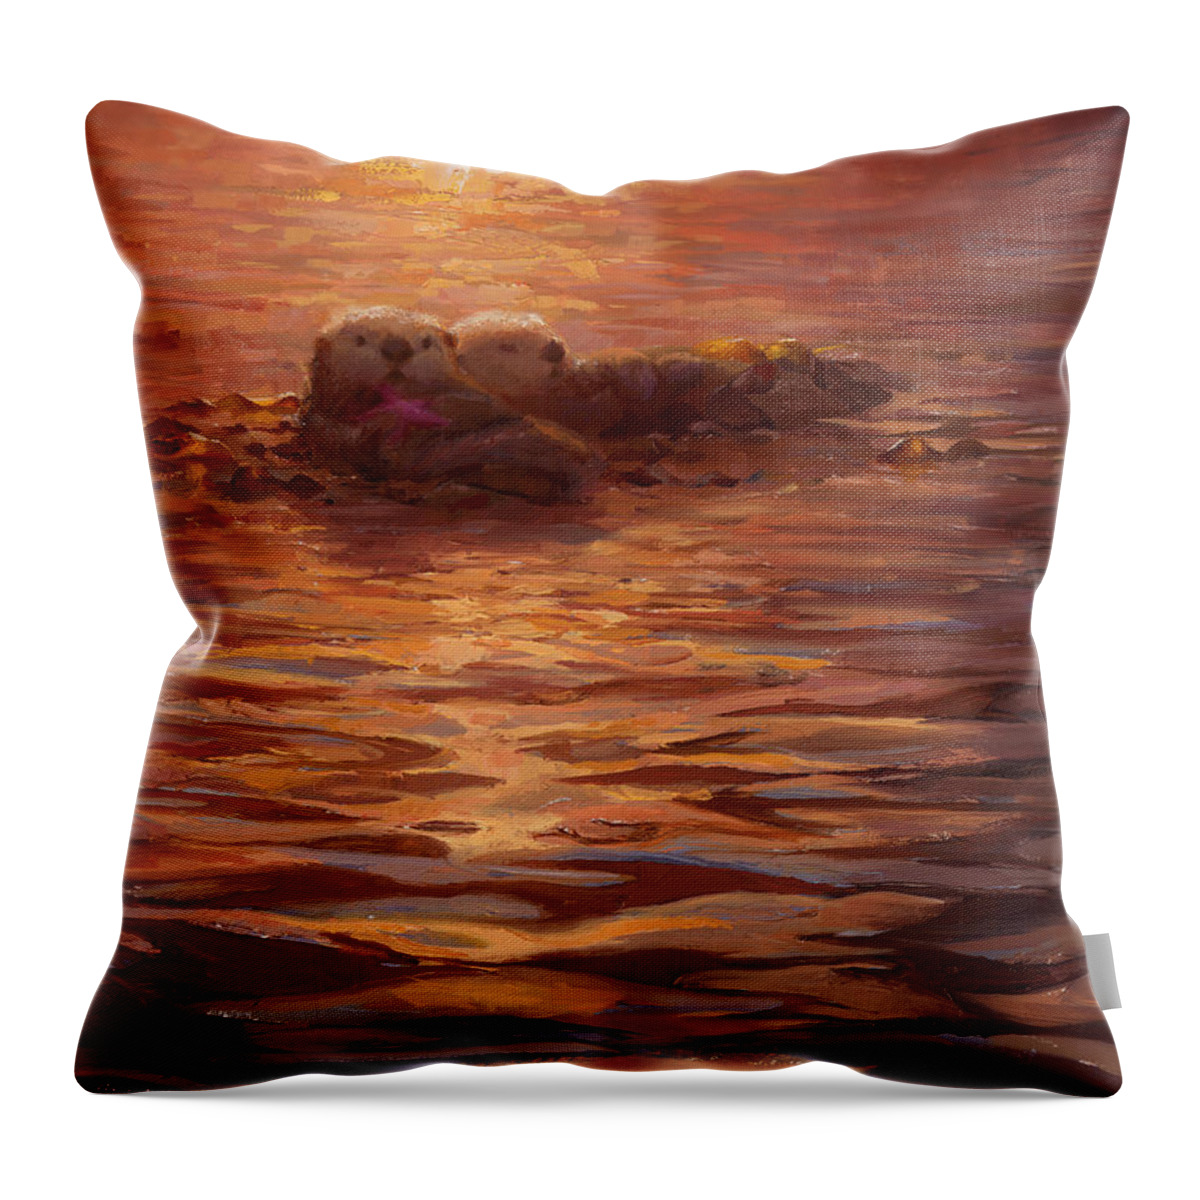 Coastal Decor Throw Pillow featuring the painting Sea Otters Floating With Kelp at Sunset - Coastal Decor - Ocean Theme - Beach Art by K Whitworth